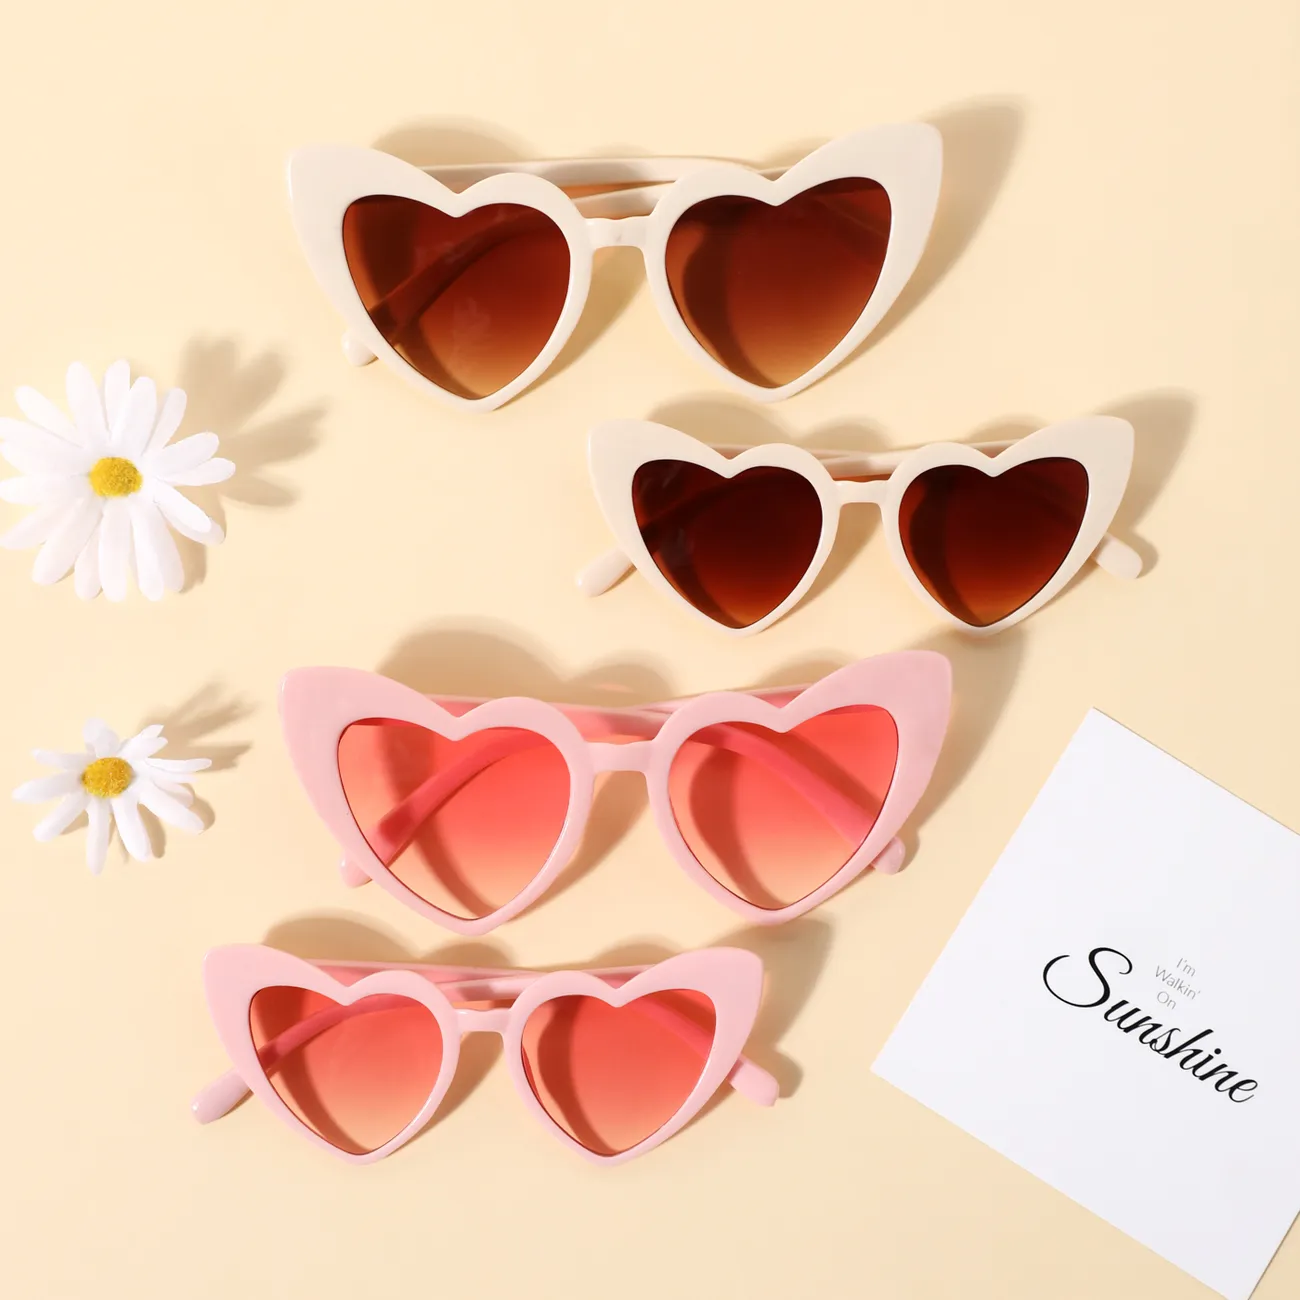 Peach Heart Frame Decorative Glasses for Mom and Me (With Glasses Bag) Beige big image 1